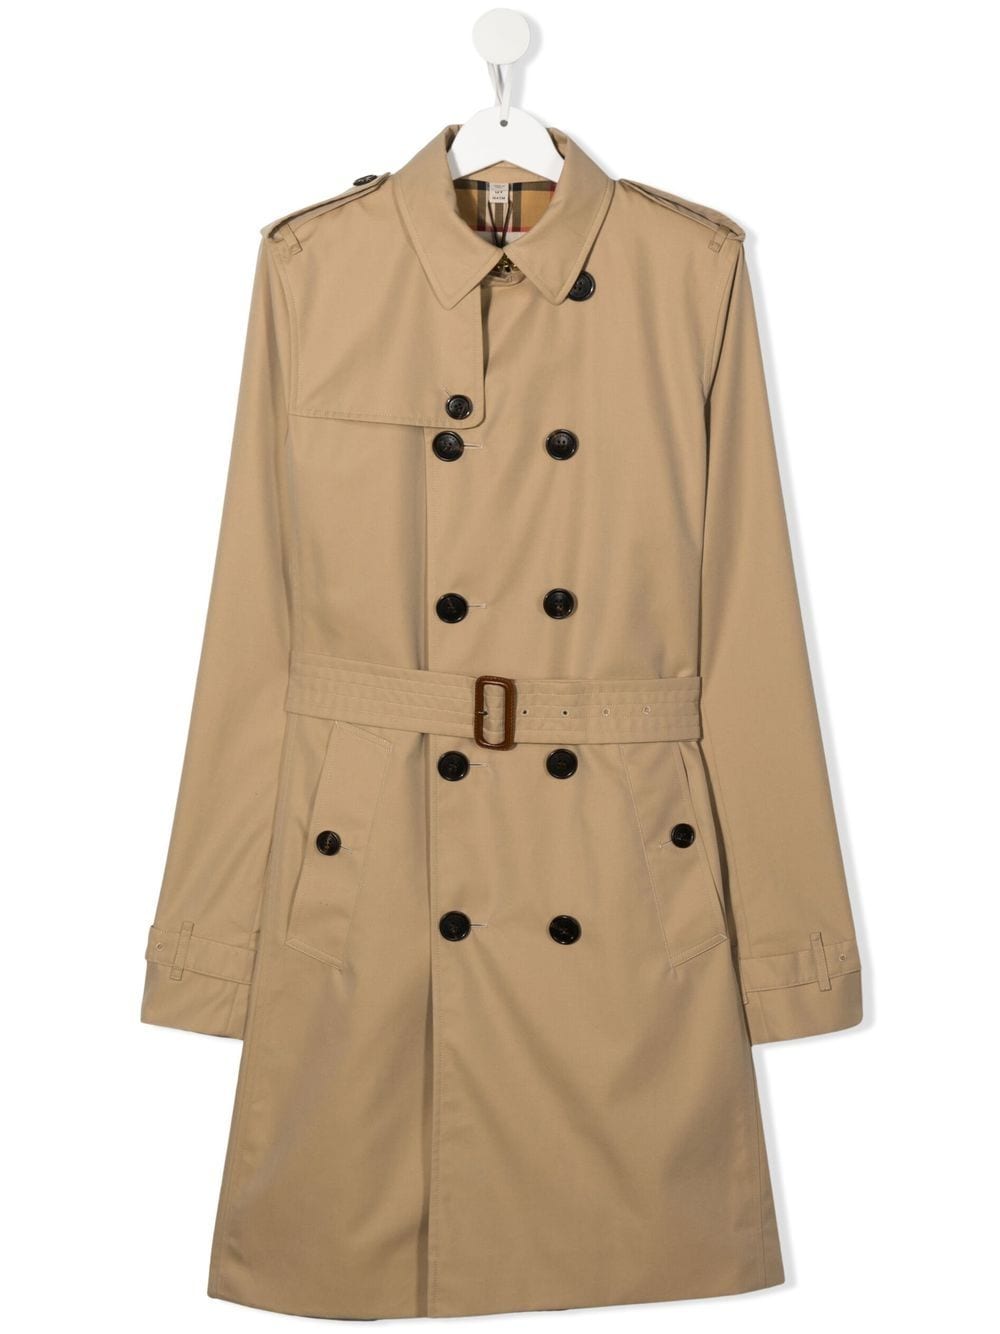 Burberry Kids TEEN double-breasted trench coat - Neutrals von Burberry Kids